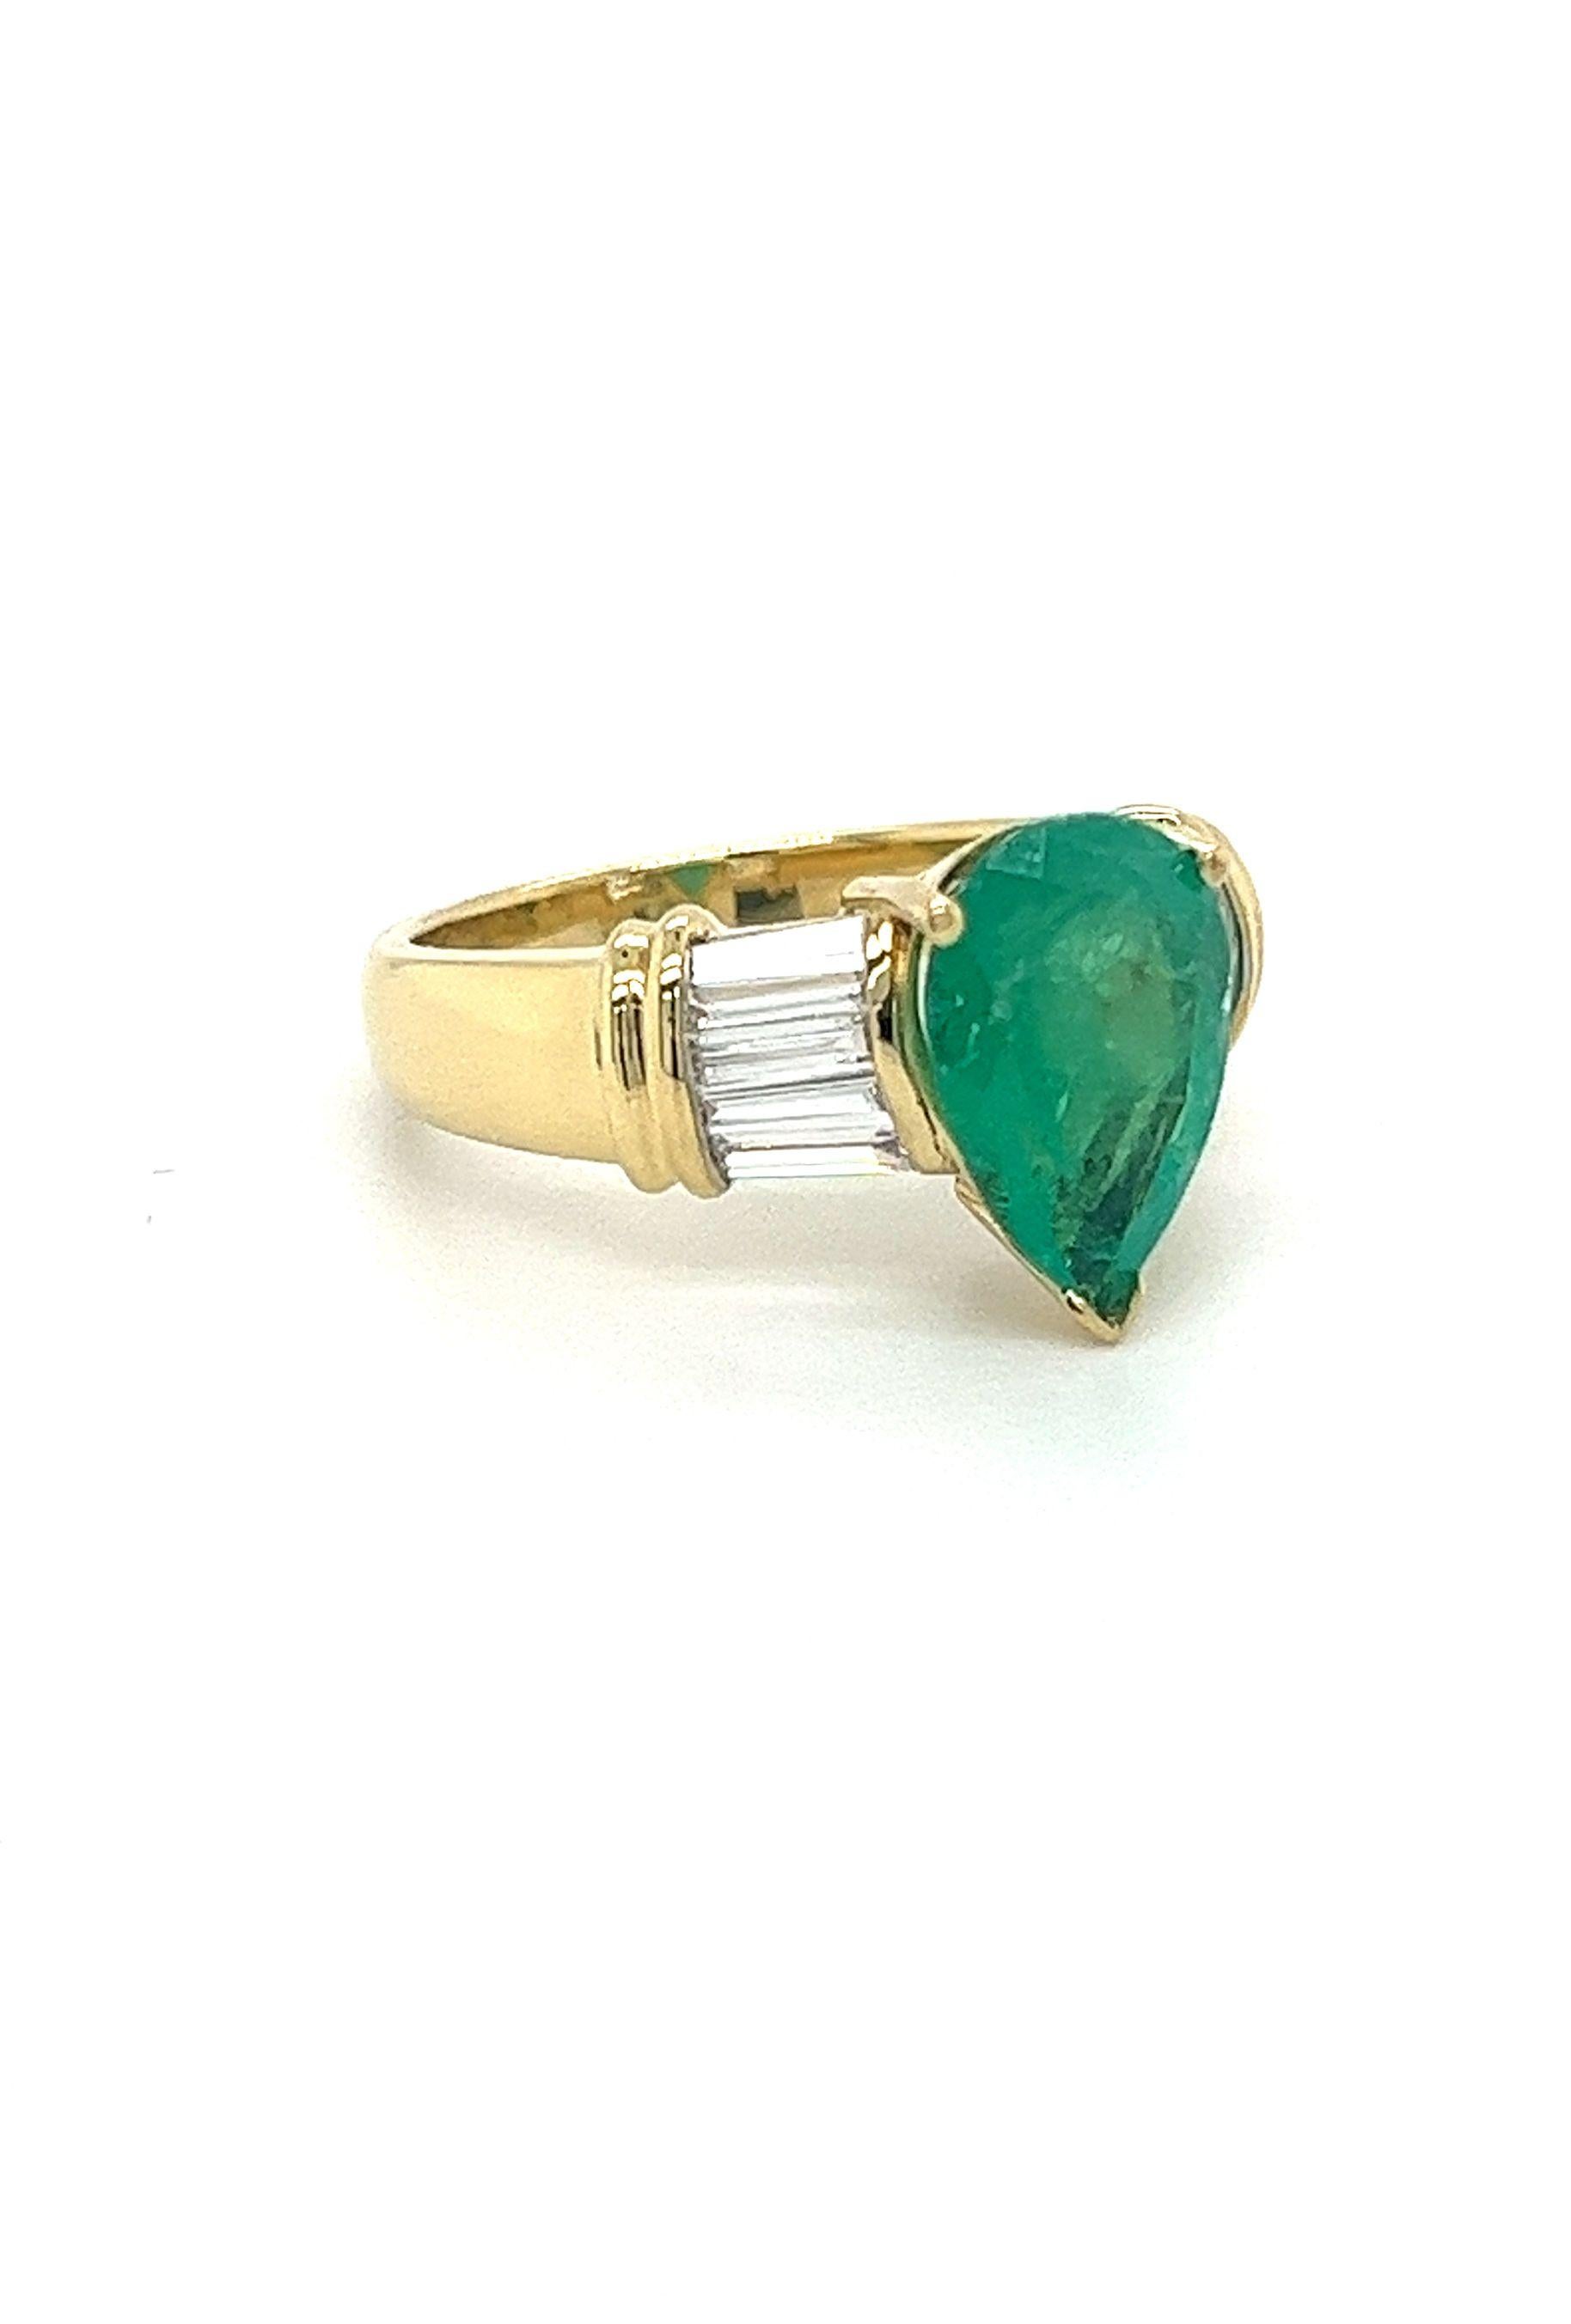 Women's 3.22 Carat Pear Cut Colombian Emerald With Baguette Diamond Side Stone 18k Ring For Sale